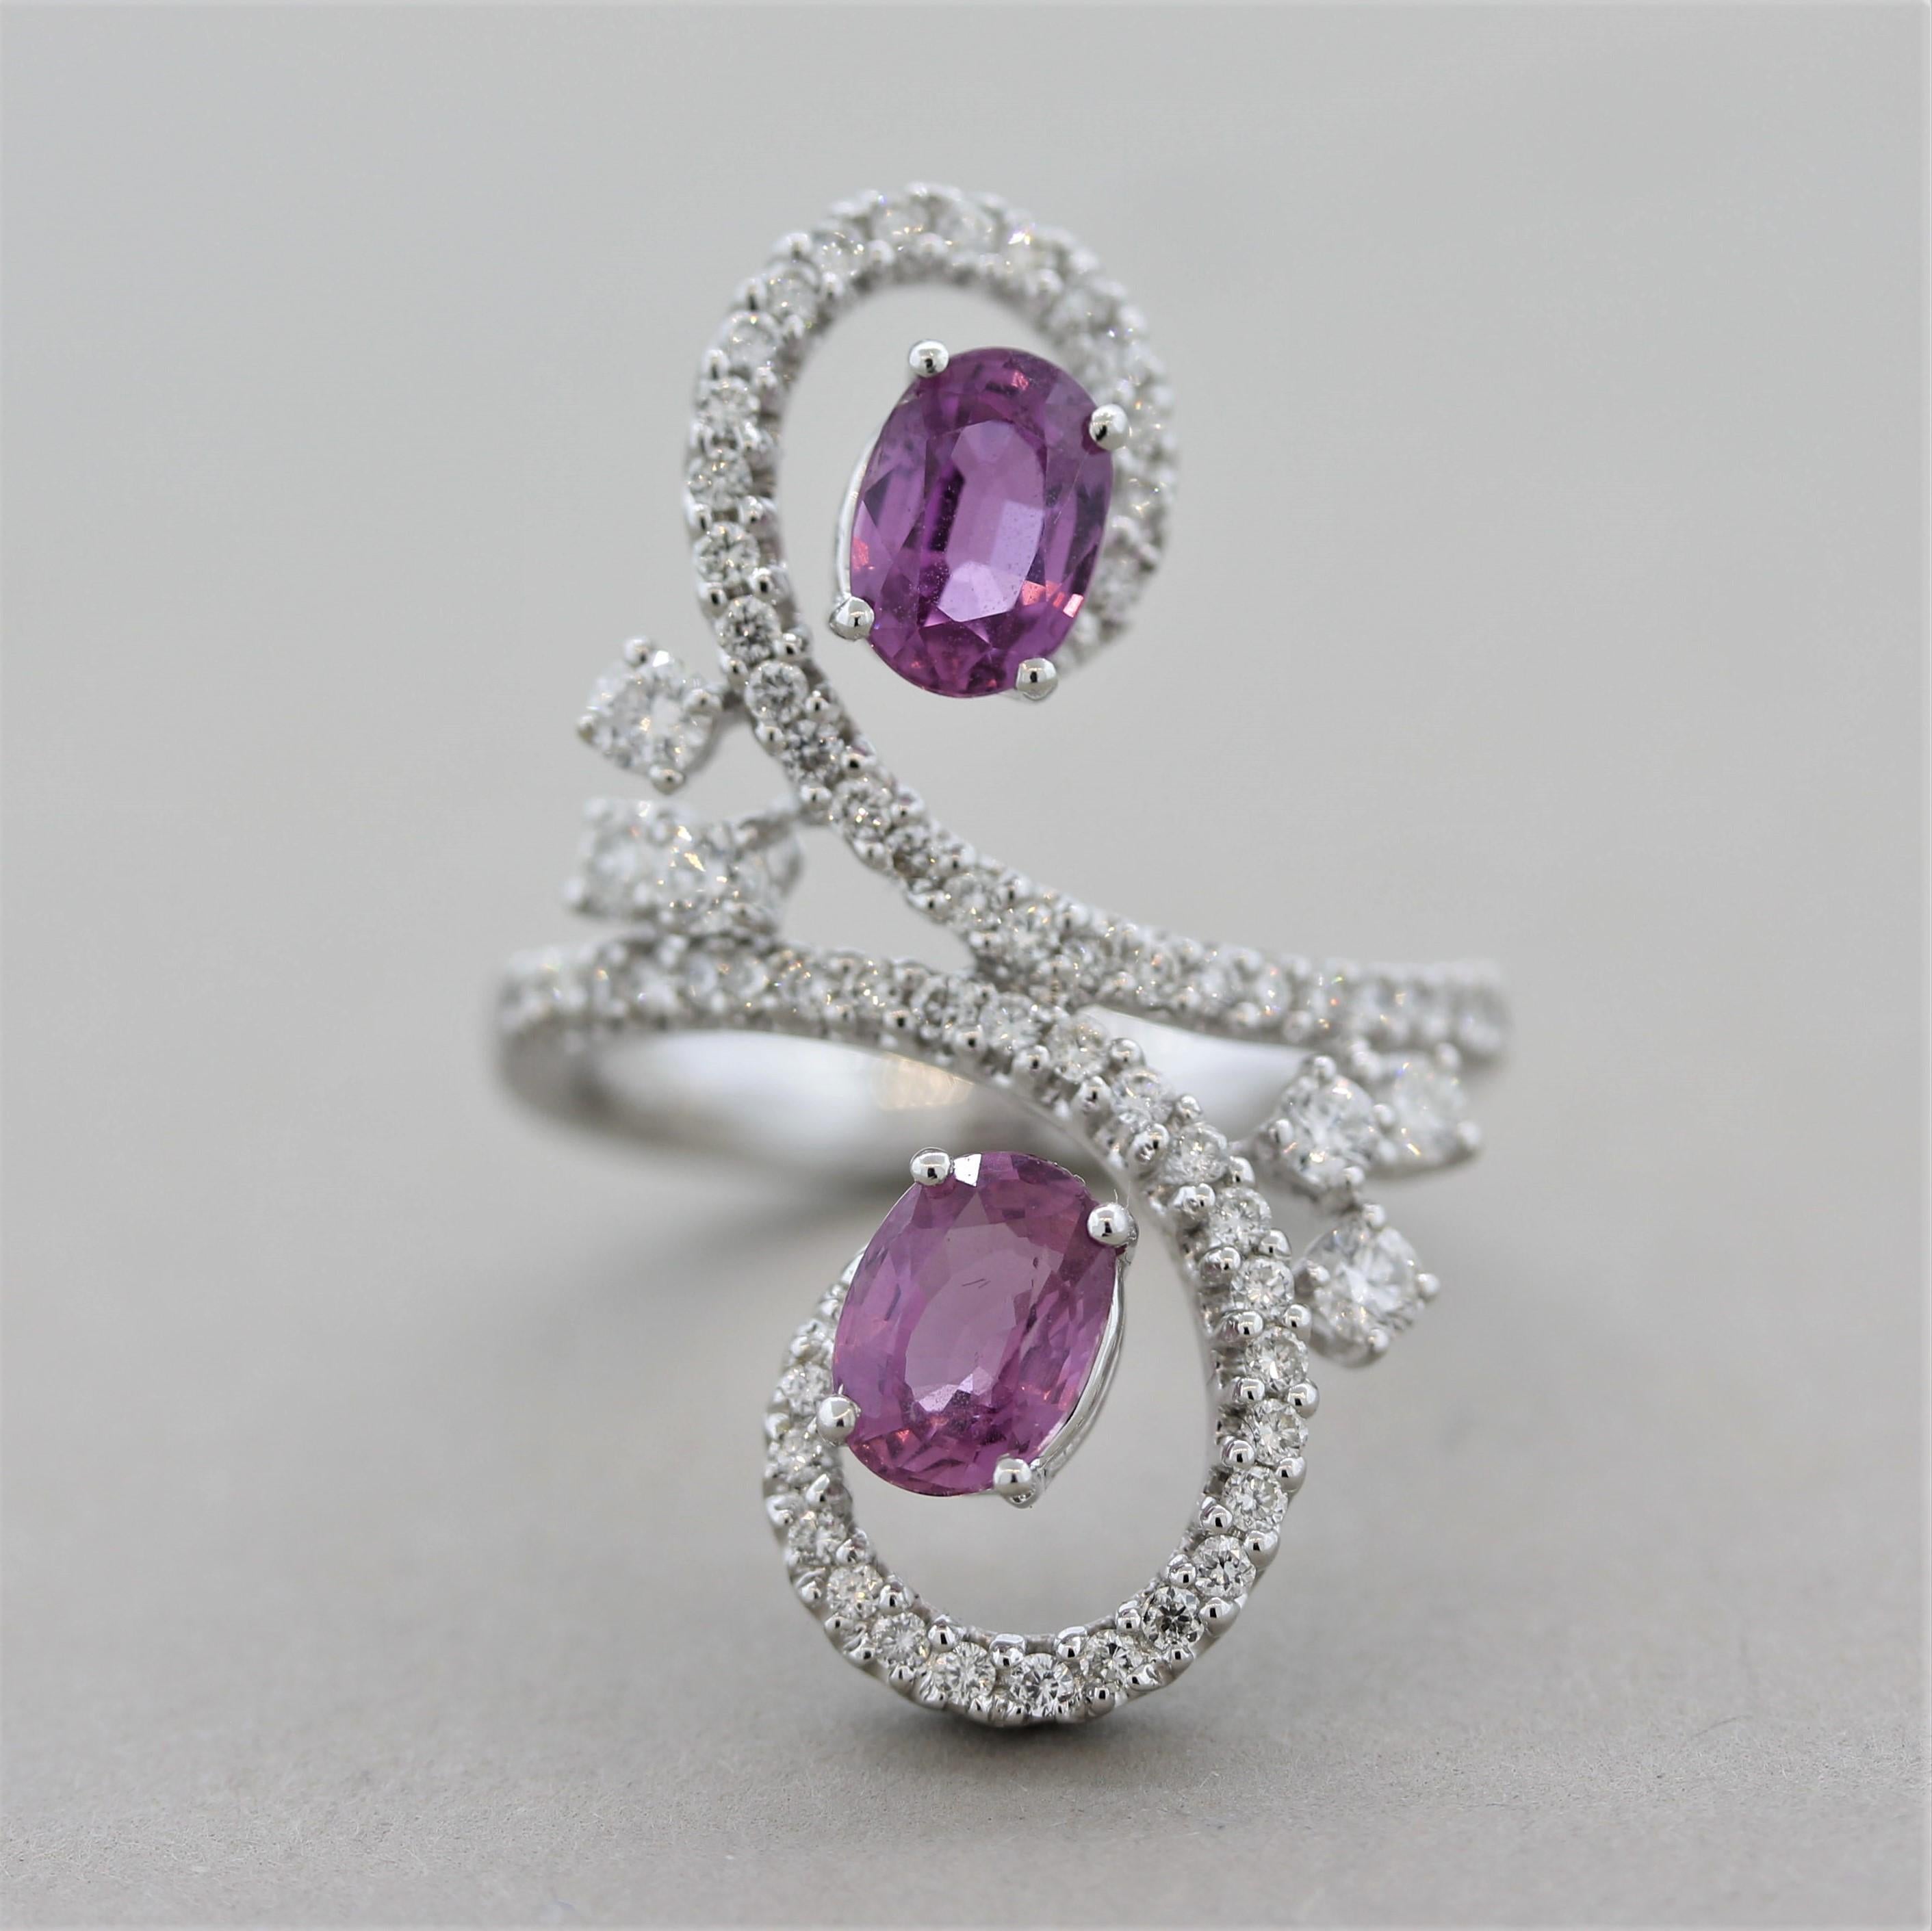 A unique and playful cocktail ring featuring 2 pink sapphires weighing 2.48 carats. They have a bright and vibrant color and are free of any eye-visible inclusions allowing the brilliance of the stones to shine. They are accented by 0.88 carats of